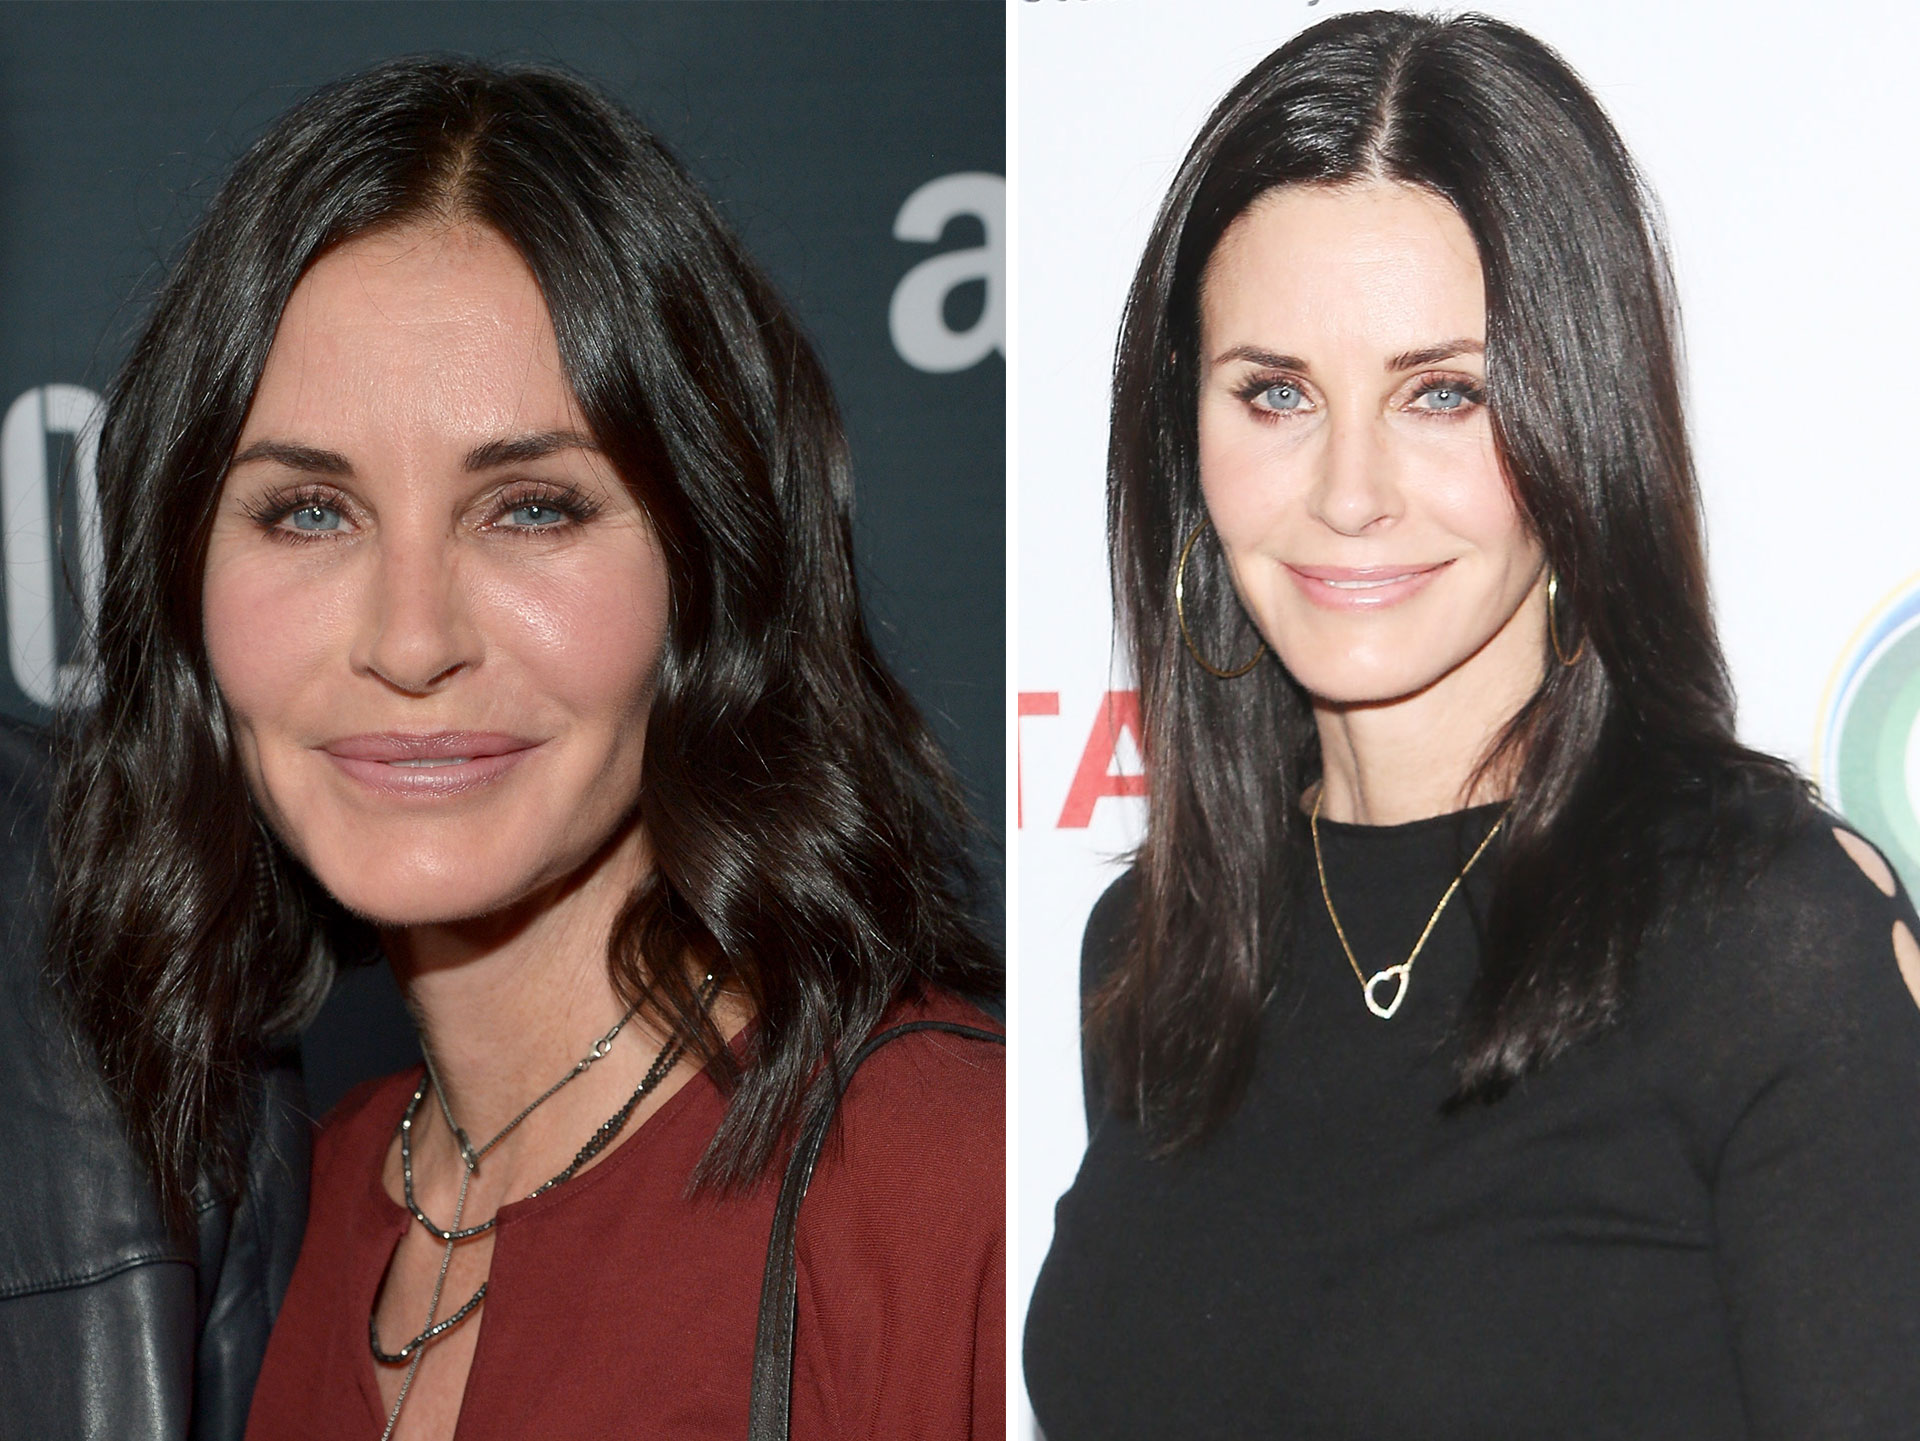 Courteney Cox got her fillers and Botox dissolved